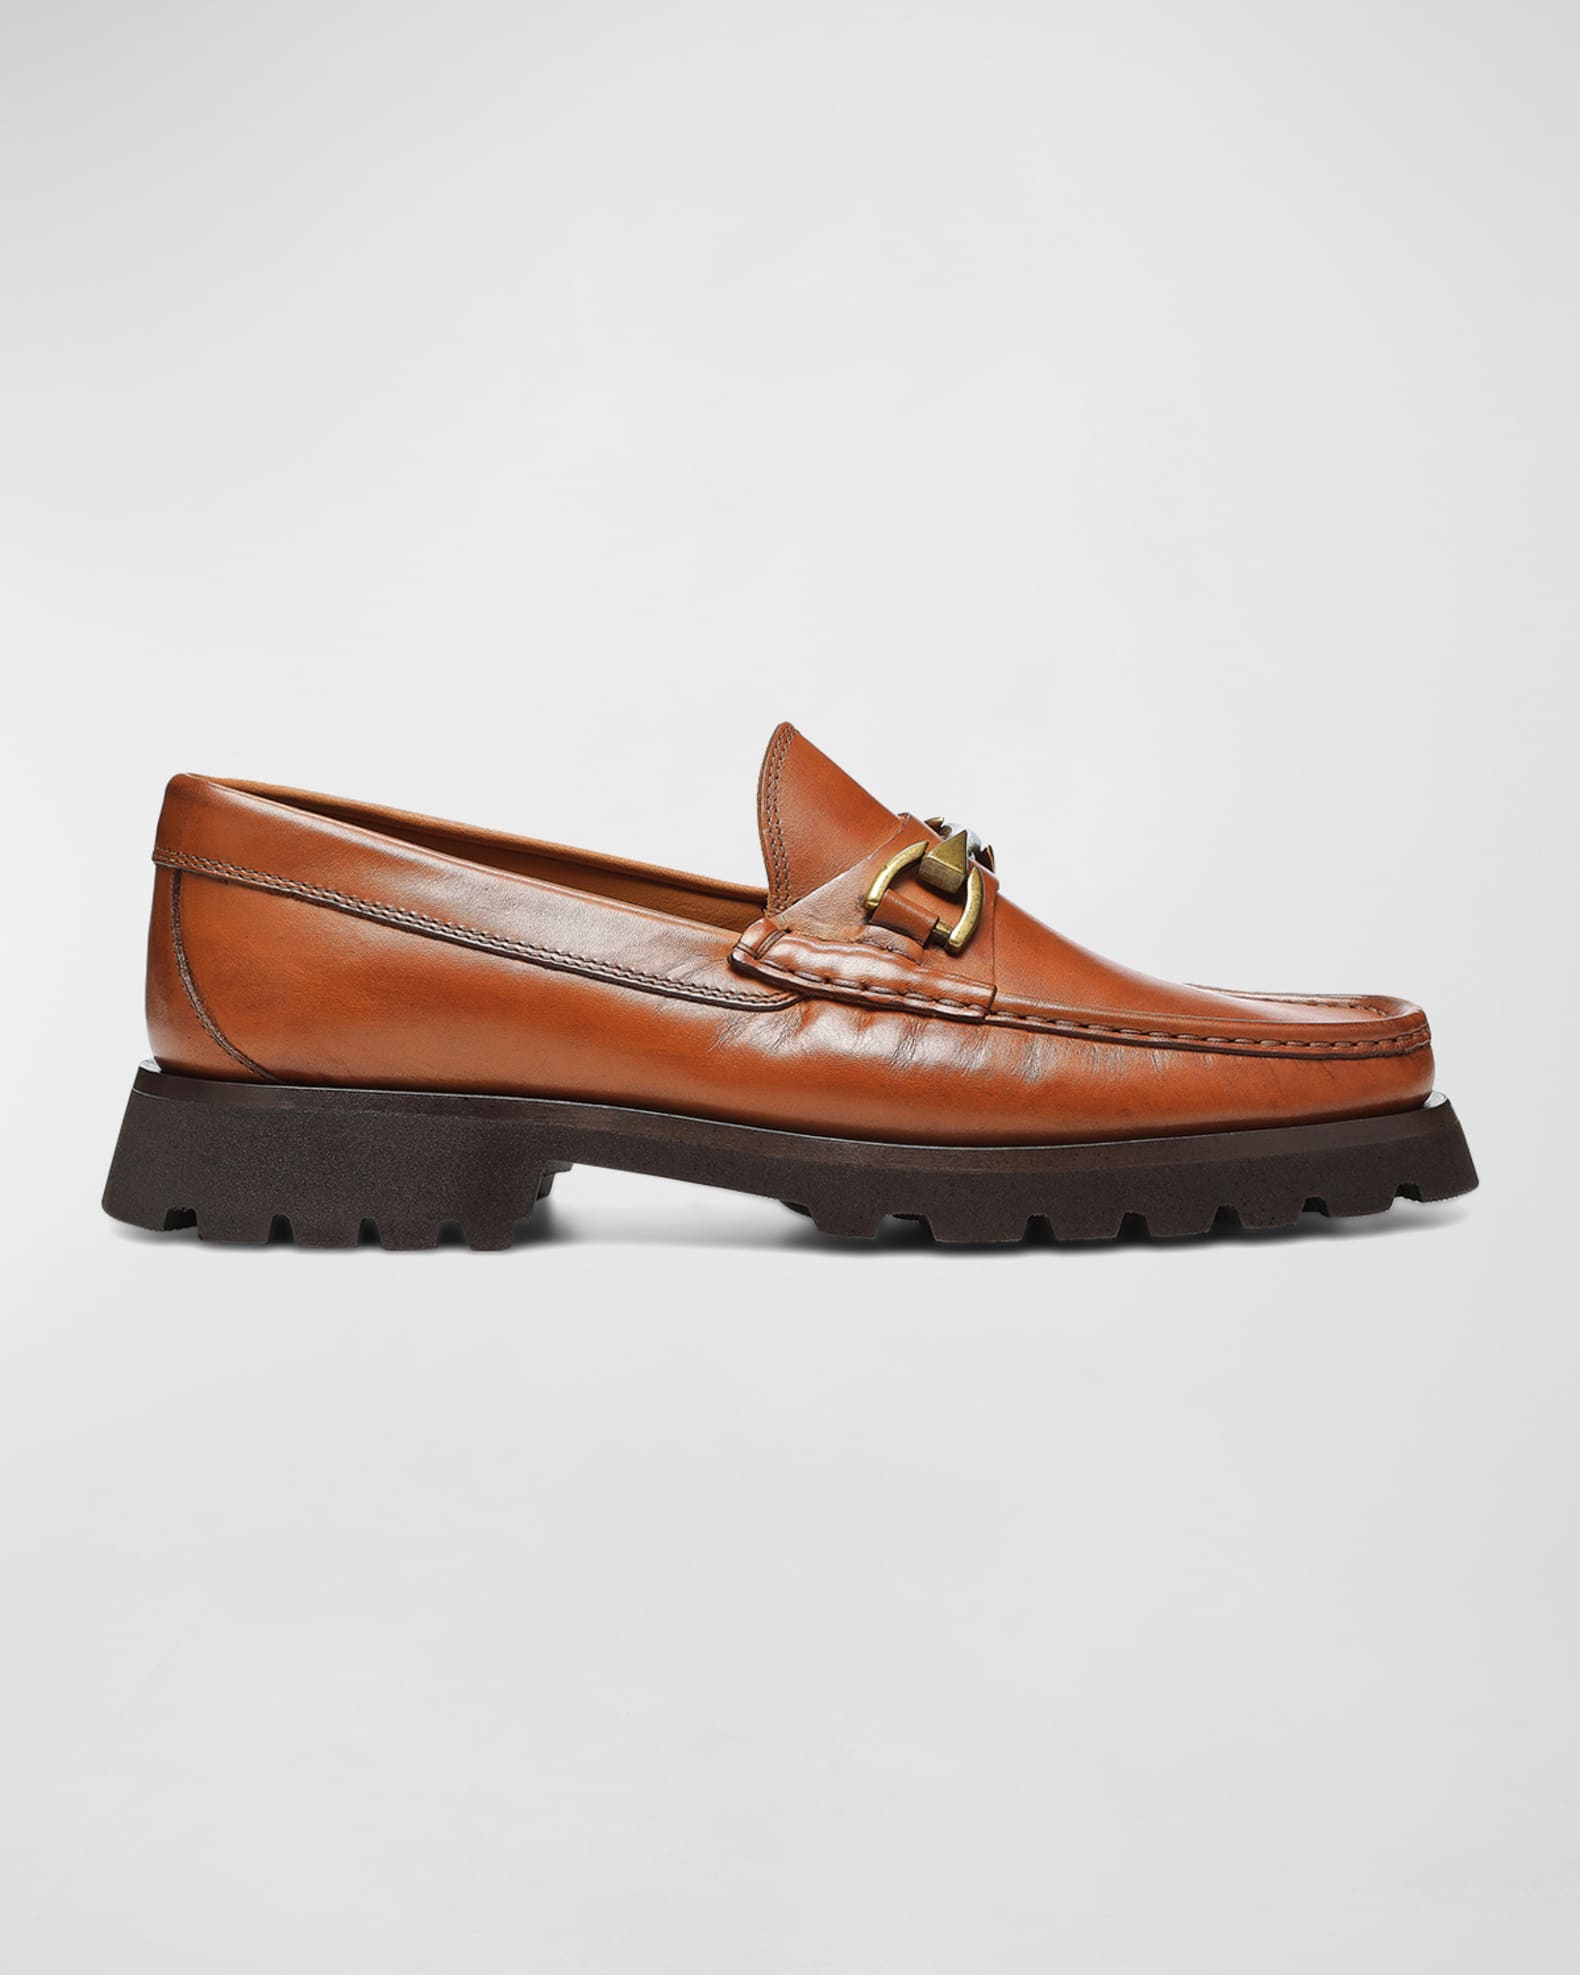 Donald Pliner Men's Davey Leather Lug-Sole Loafers with Bit-Strap ...